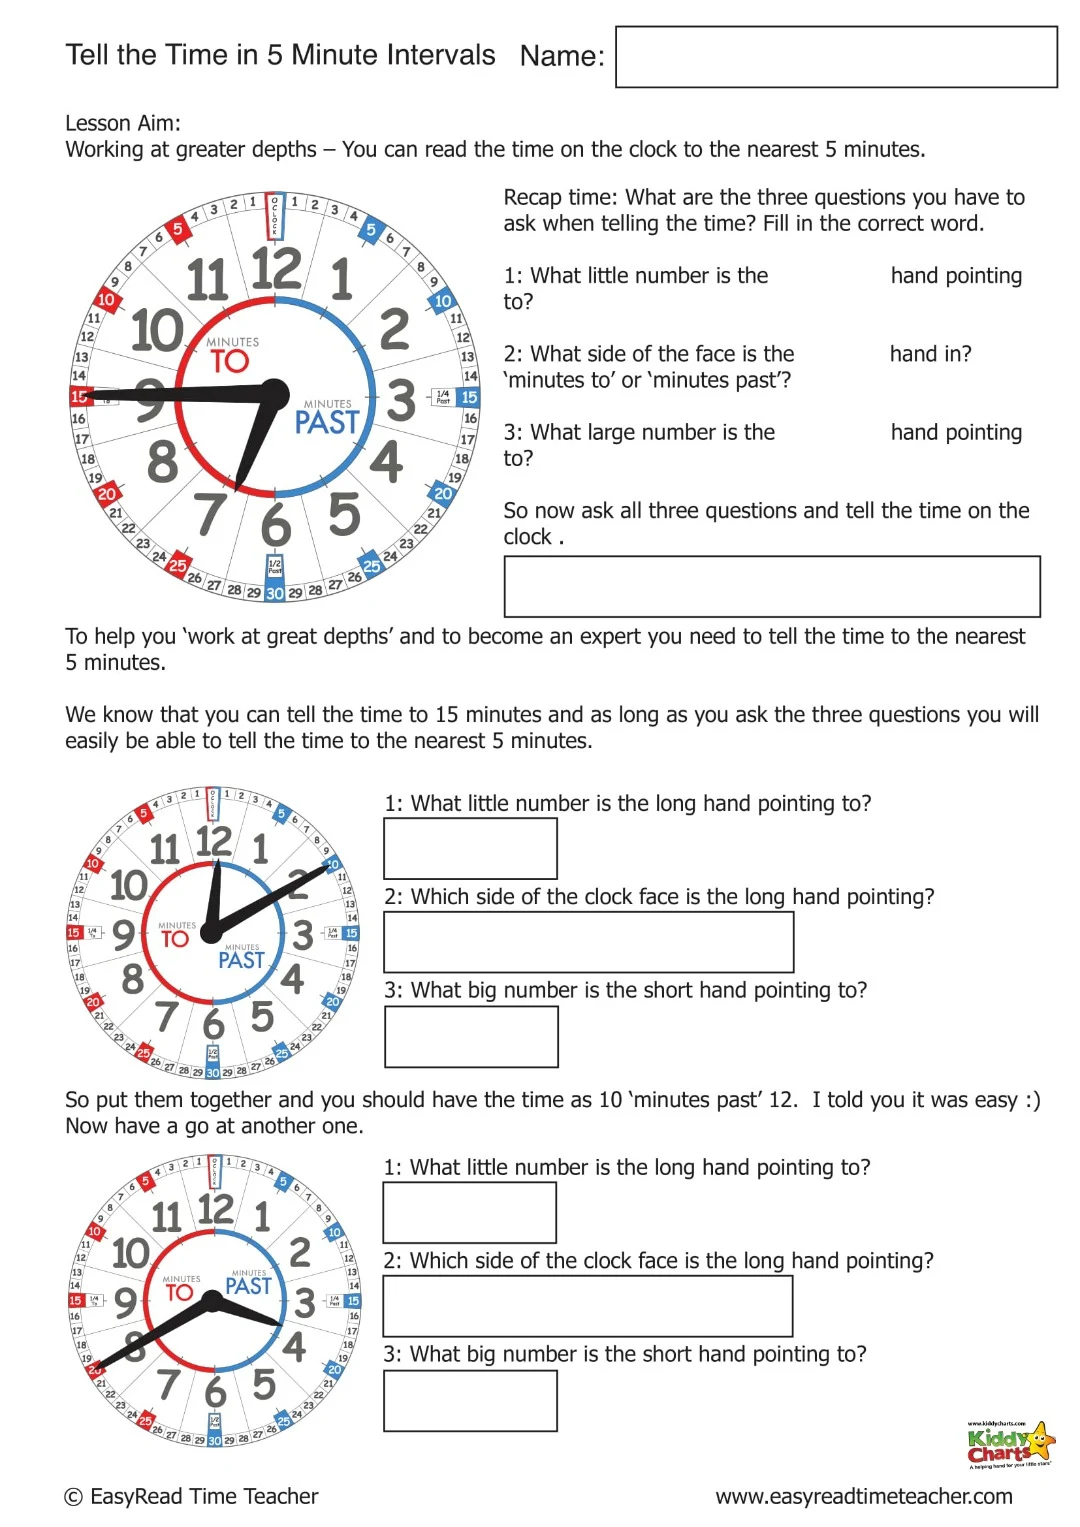 Learning to tell the time in 5 minute intervals - worksheet #time #homeschool #kids